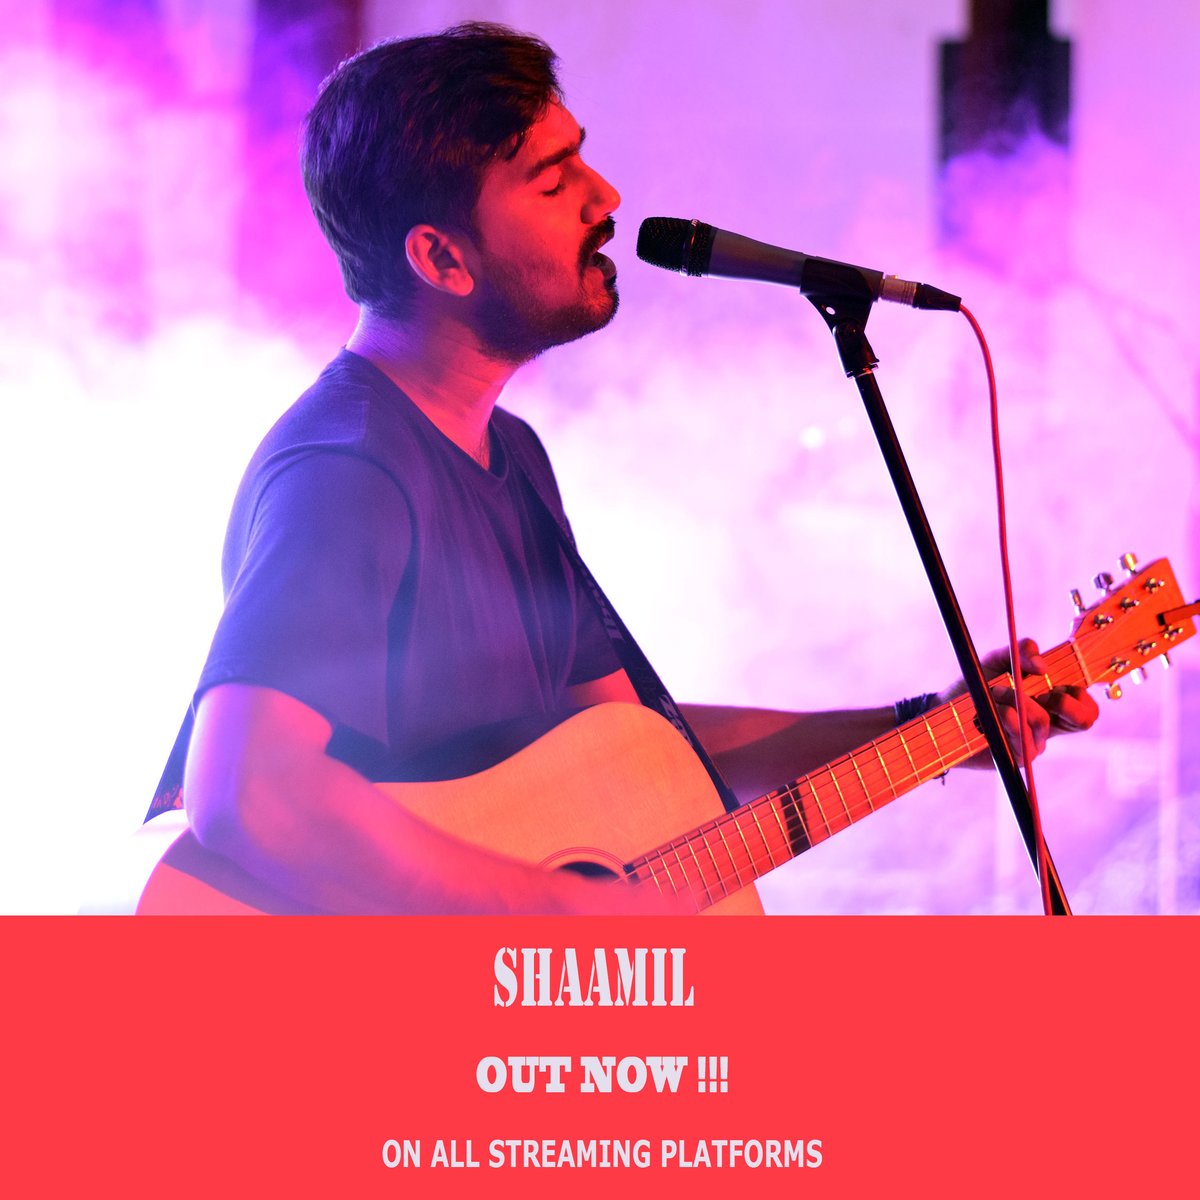 Shaamil out now on Youtube Music, Apple Music, Amazon Music and Saavn. Listen and download right away -

linktr.ee/AbhilashChoudh…